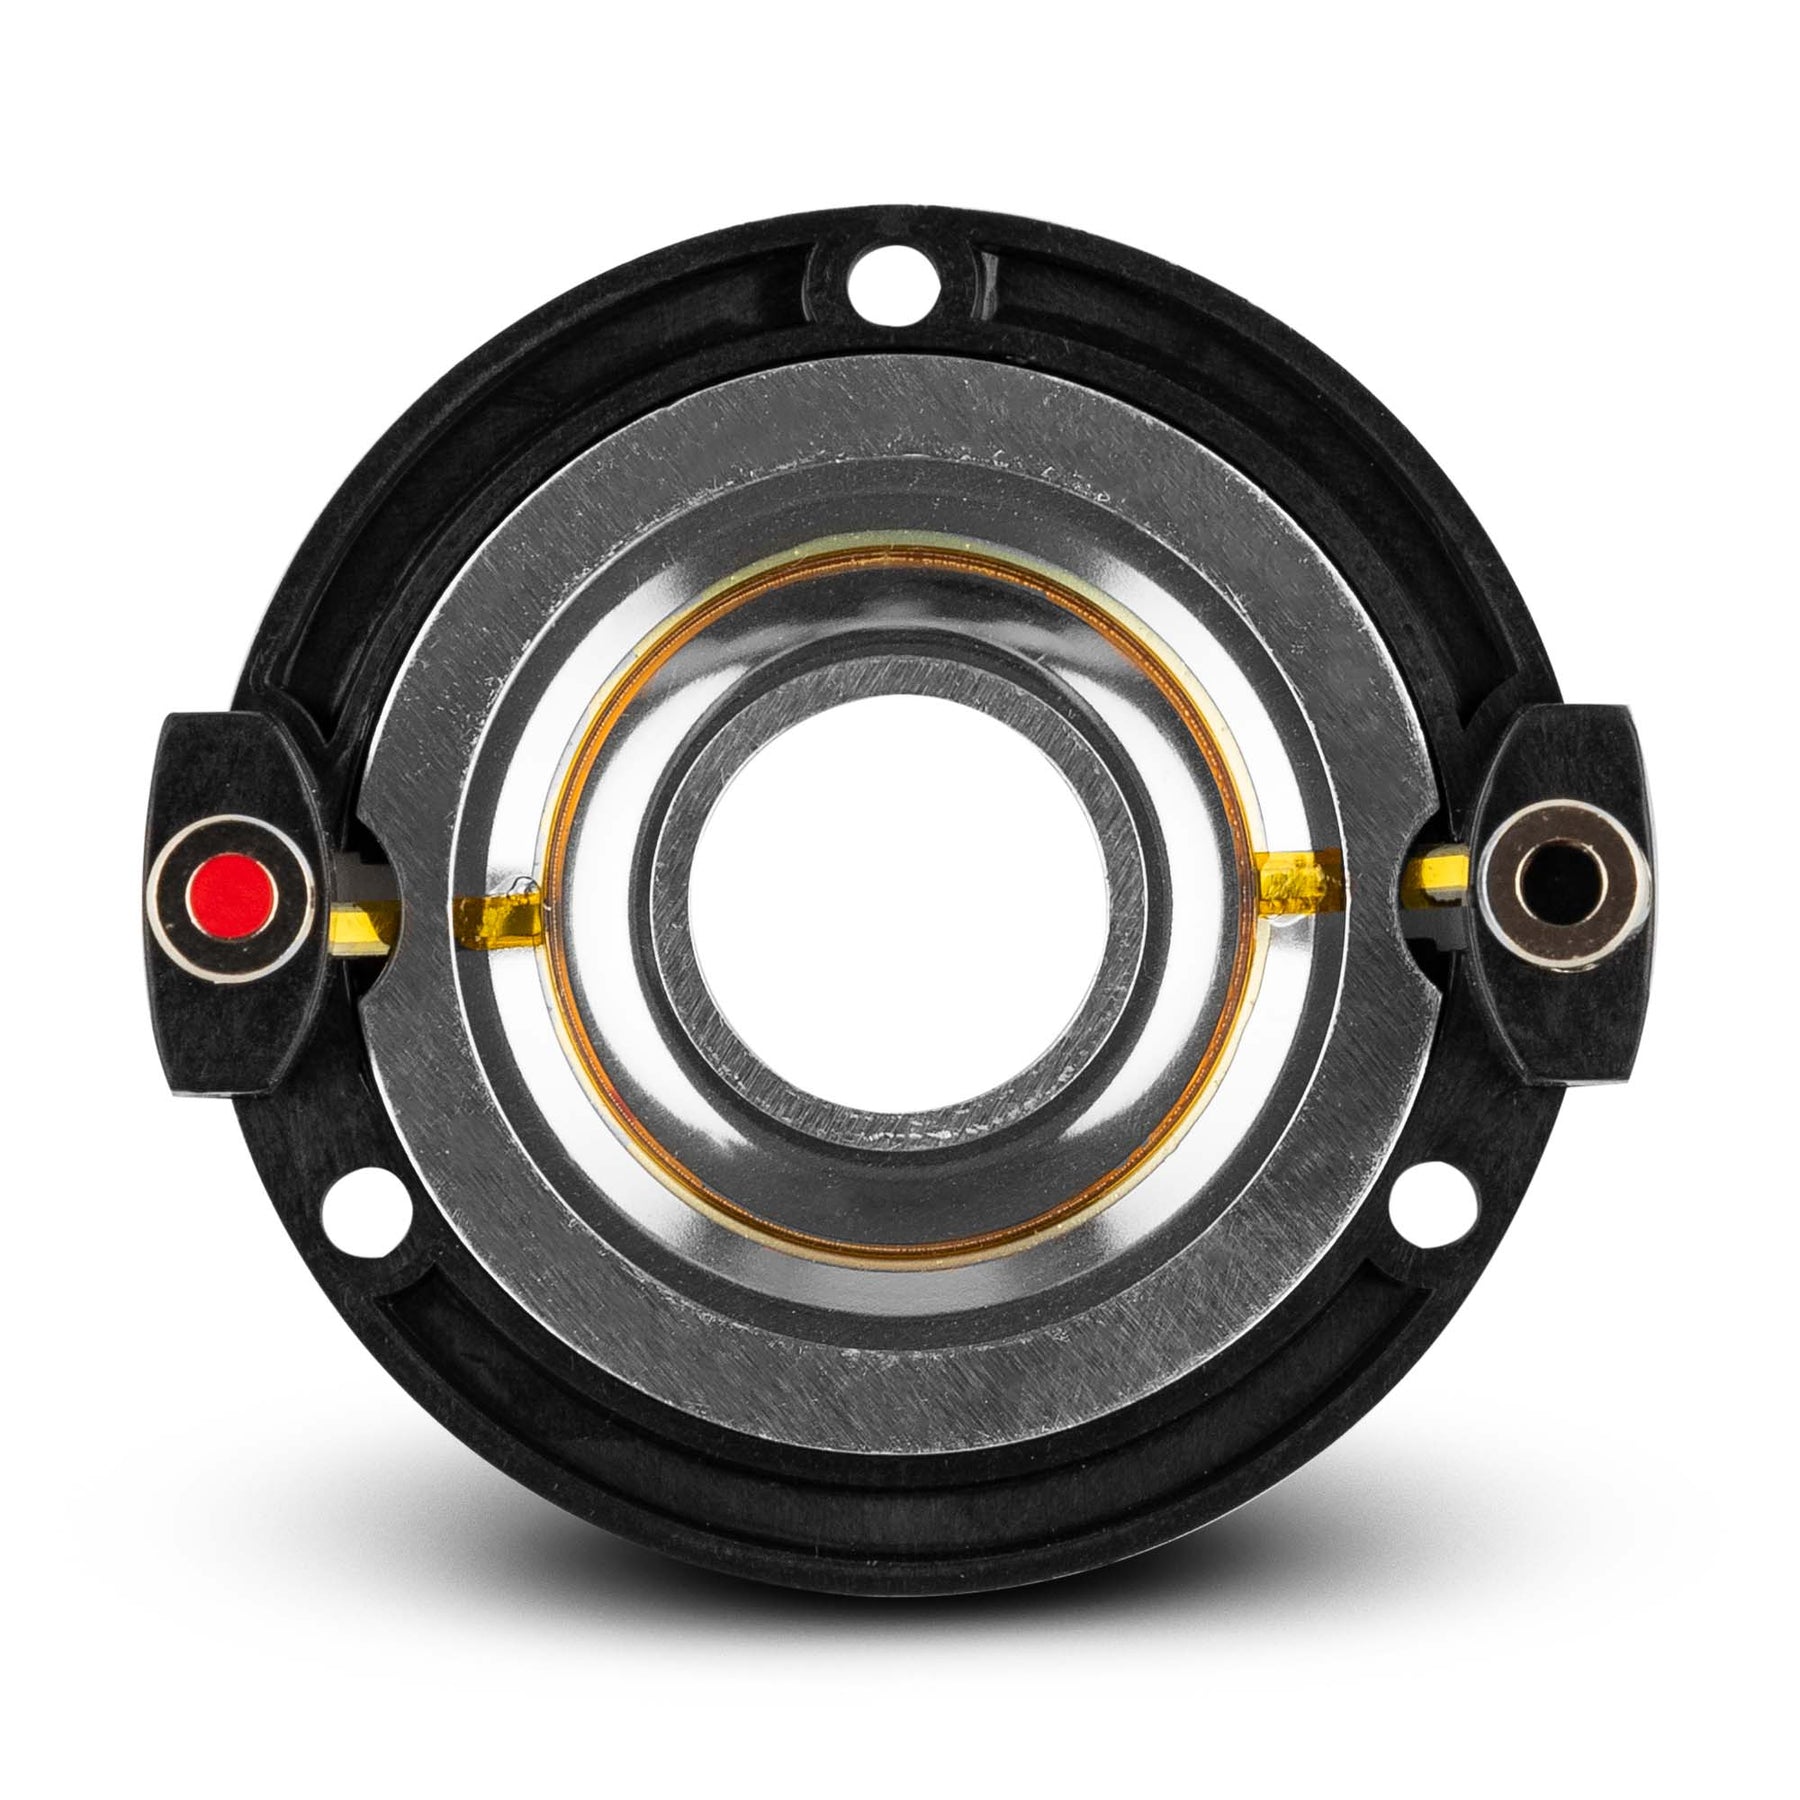 PRO 1.3" Replacement Diaphragm for GTX1XL and Universal 4-Ohm